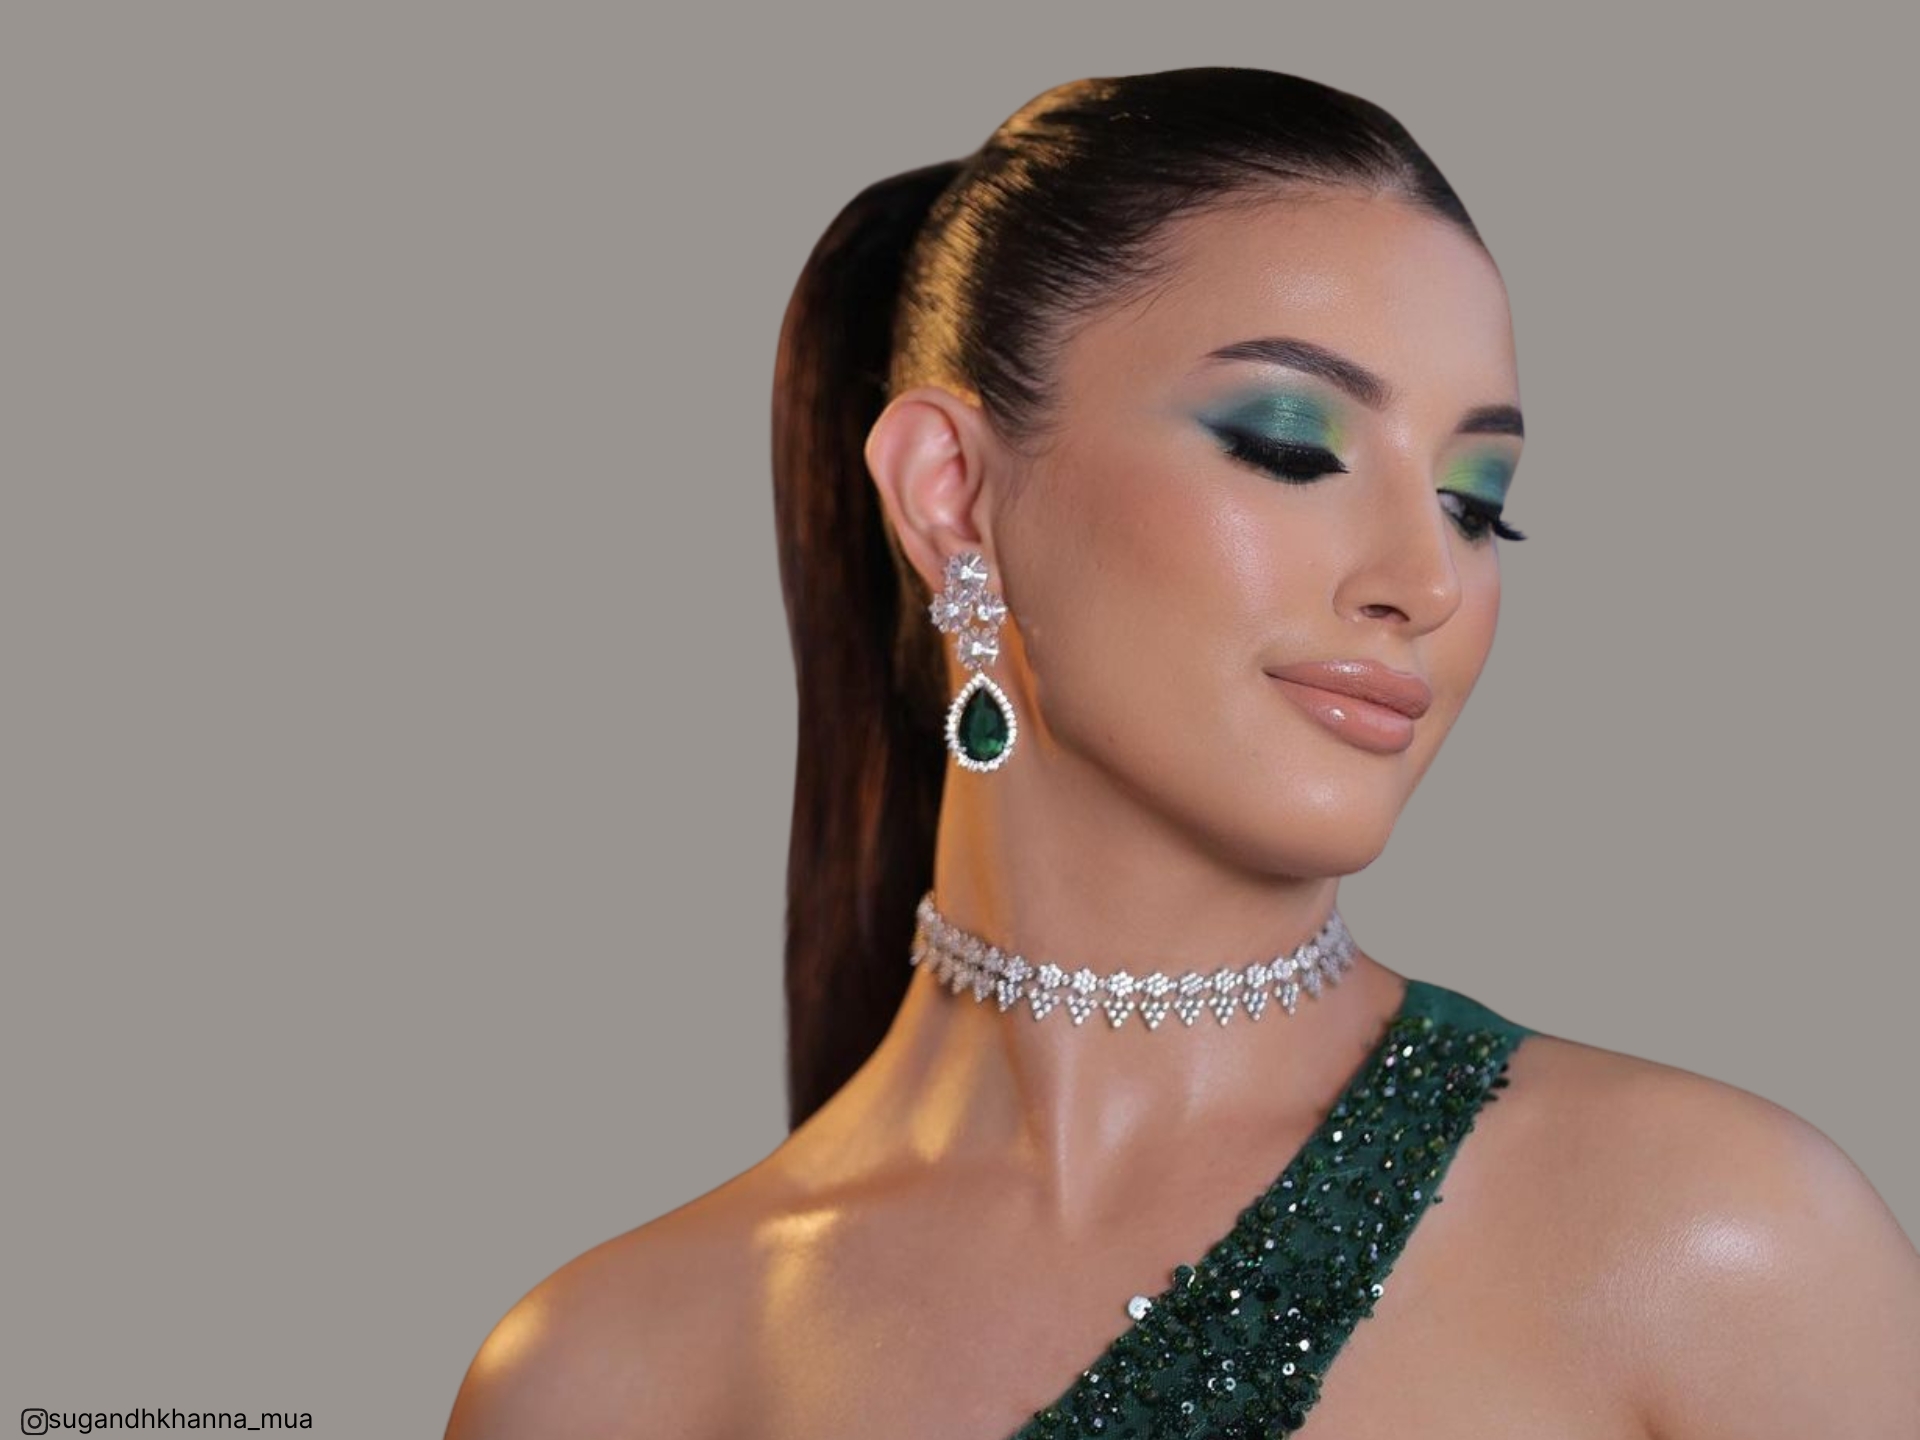 These 20 Emerald Green Prom Makeup Ideas Will Unlock Your Glam Look